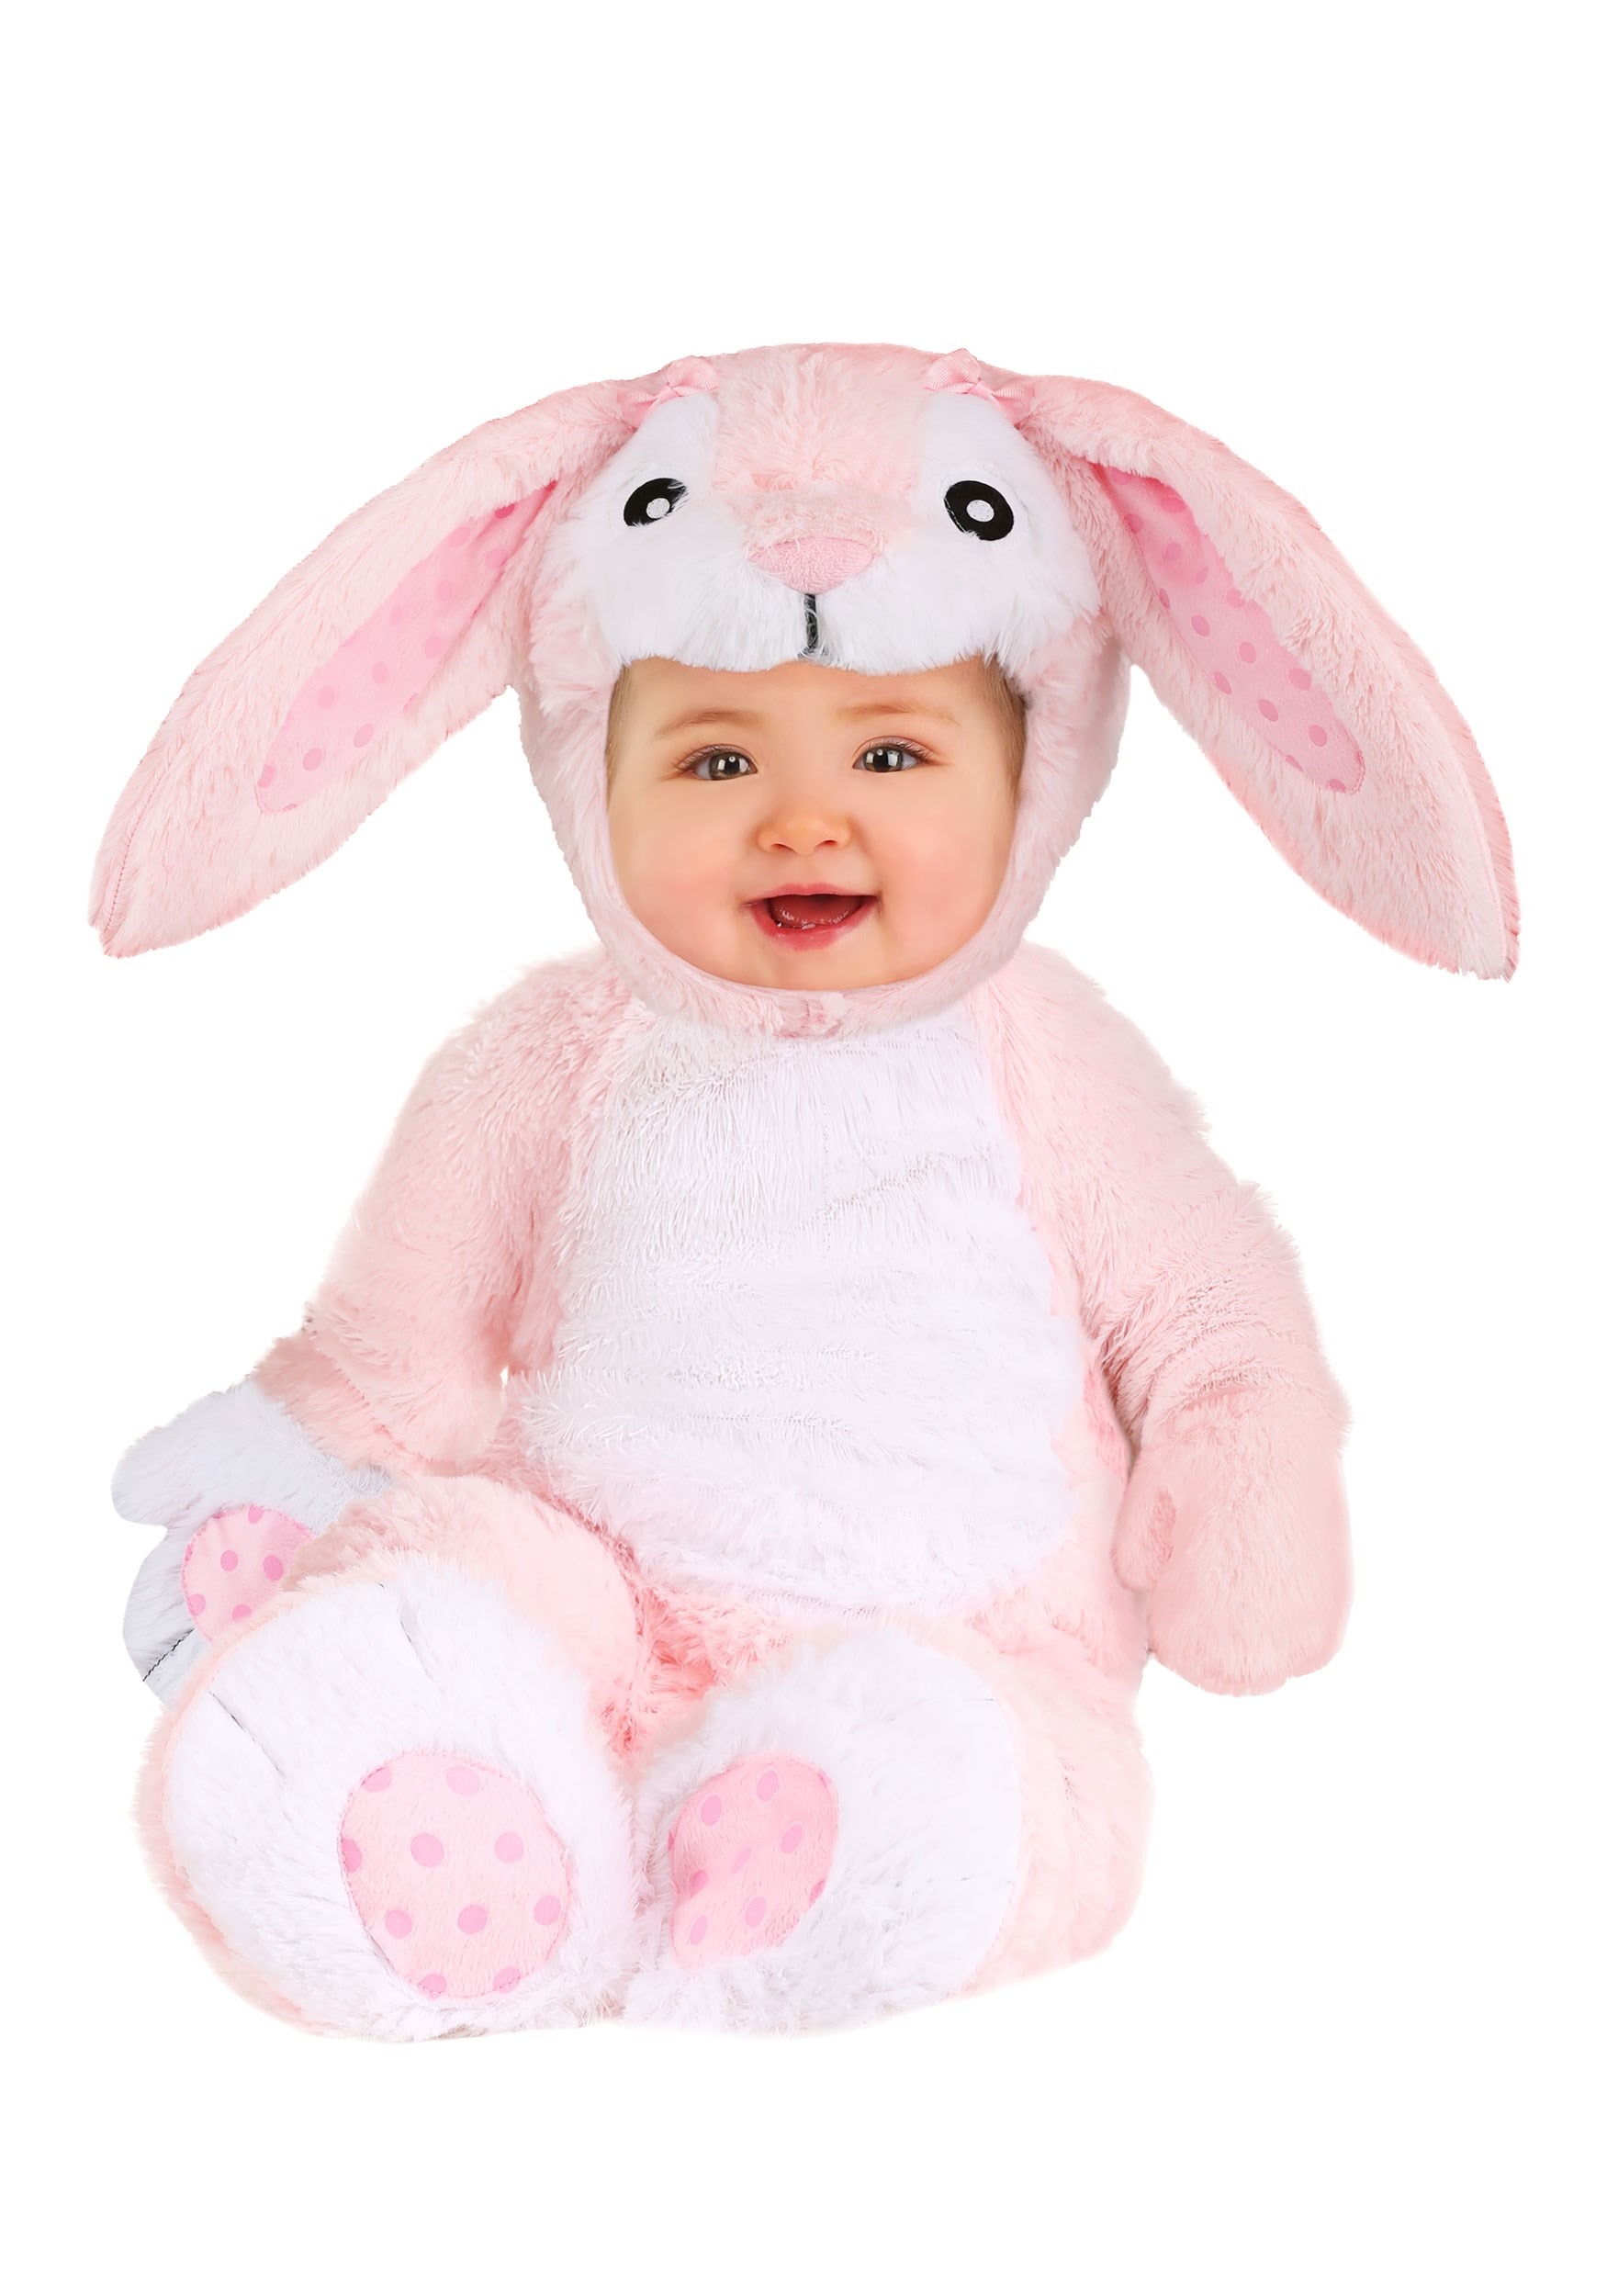 Buy Swovo Baby Outfit Cute Knit Bunny Rabbit for Girls Newborn Baby  Photography Props Infant Costumes Set Grey Online at Low Prices in India -  Amazon.in